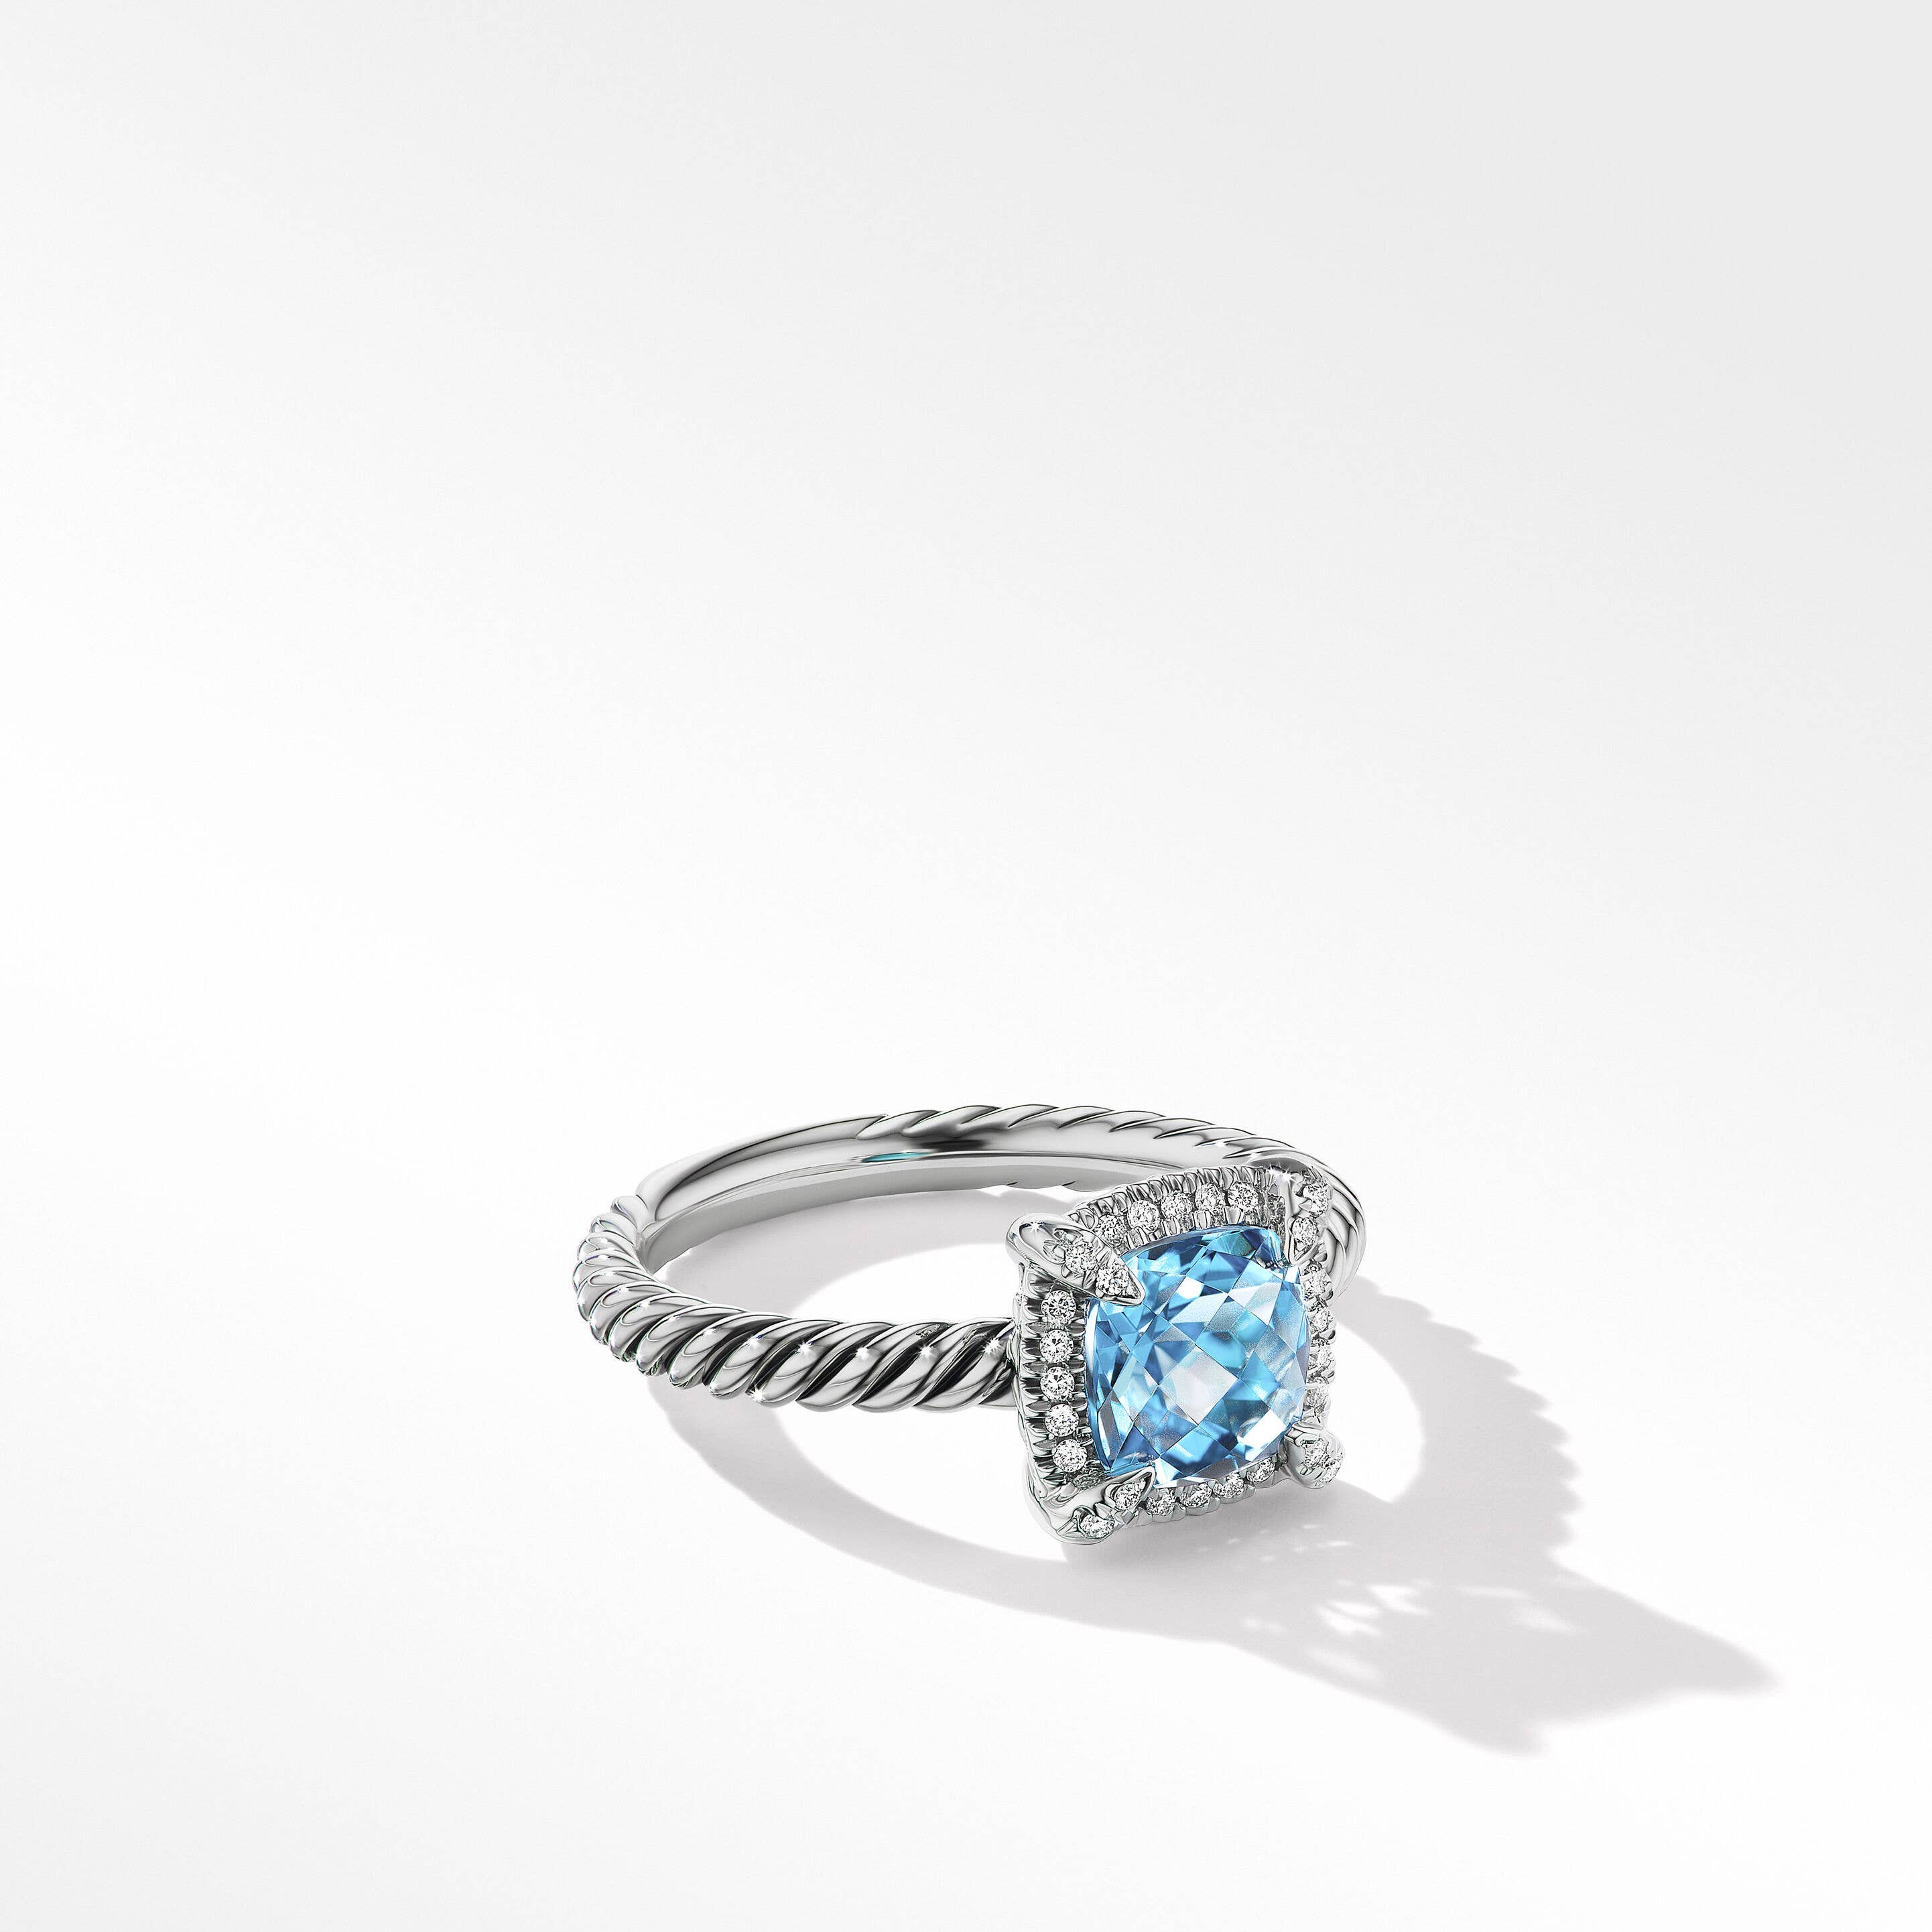 Petite Chatelaine® Pavé Bezel Ring in Sterling Silver with Blue Topaz and Diamonds